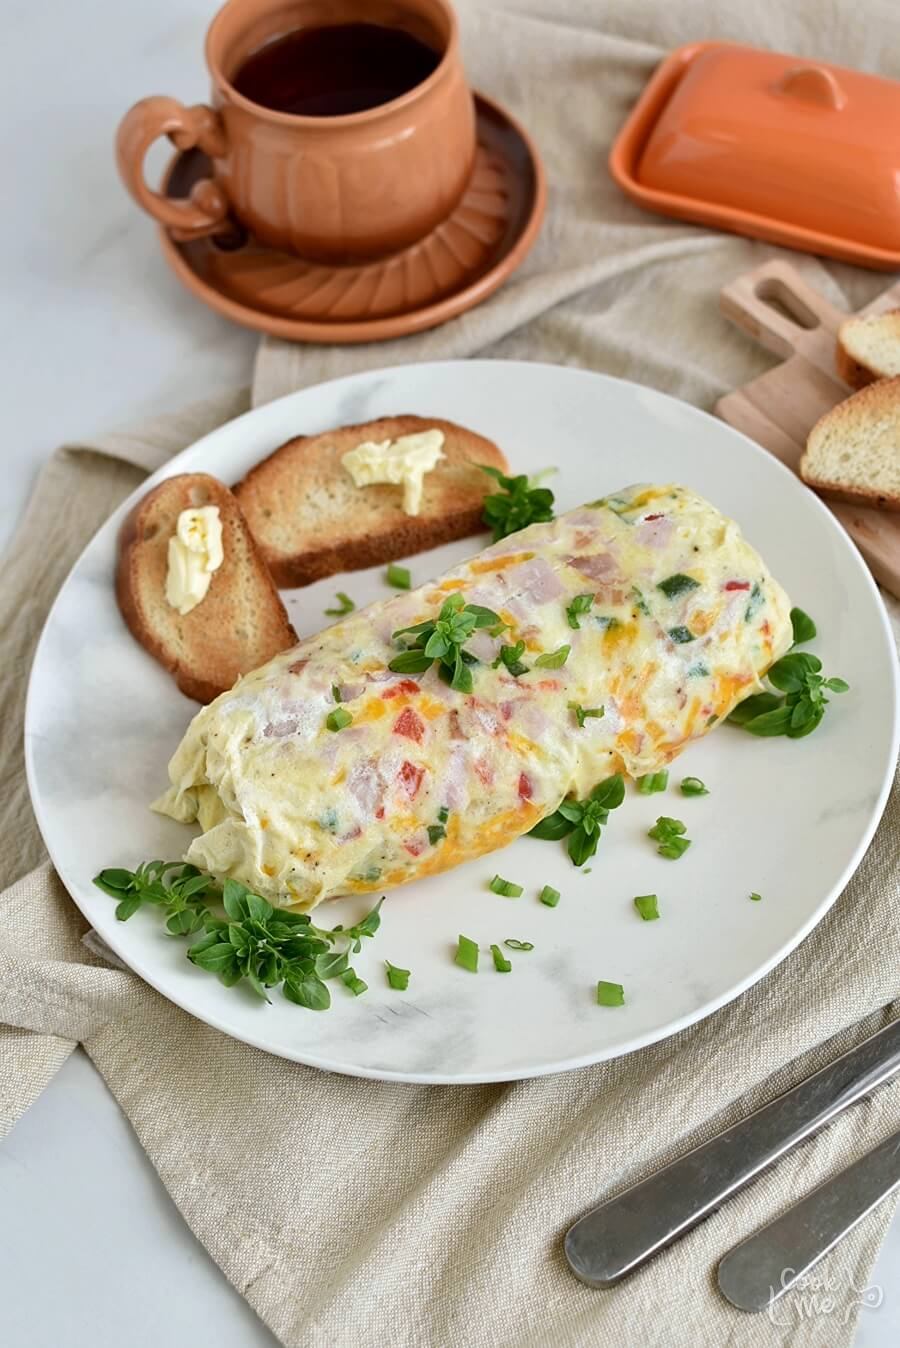 On The Go Omelet Recipe - Cook.me Recipes